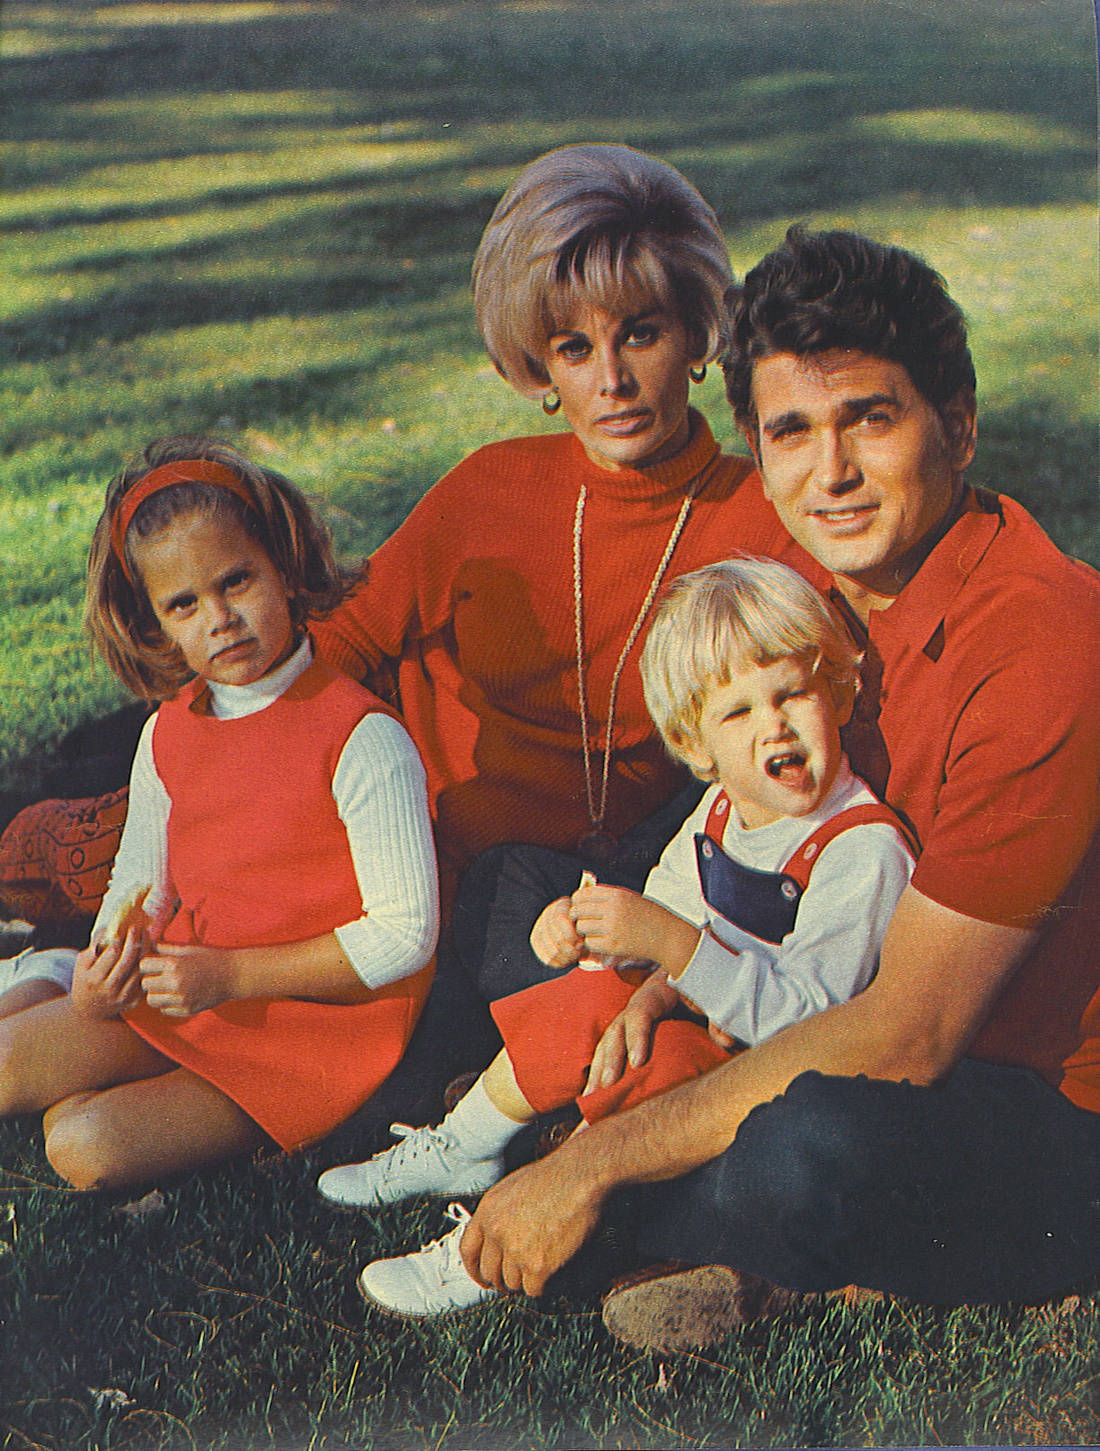 Michael Landon with his Family Wallpaper